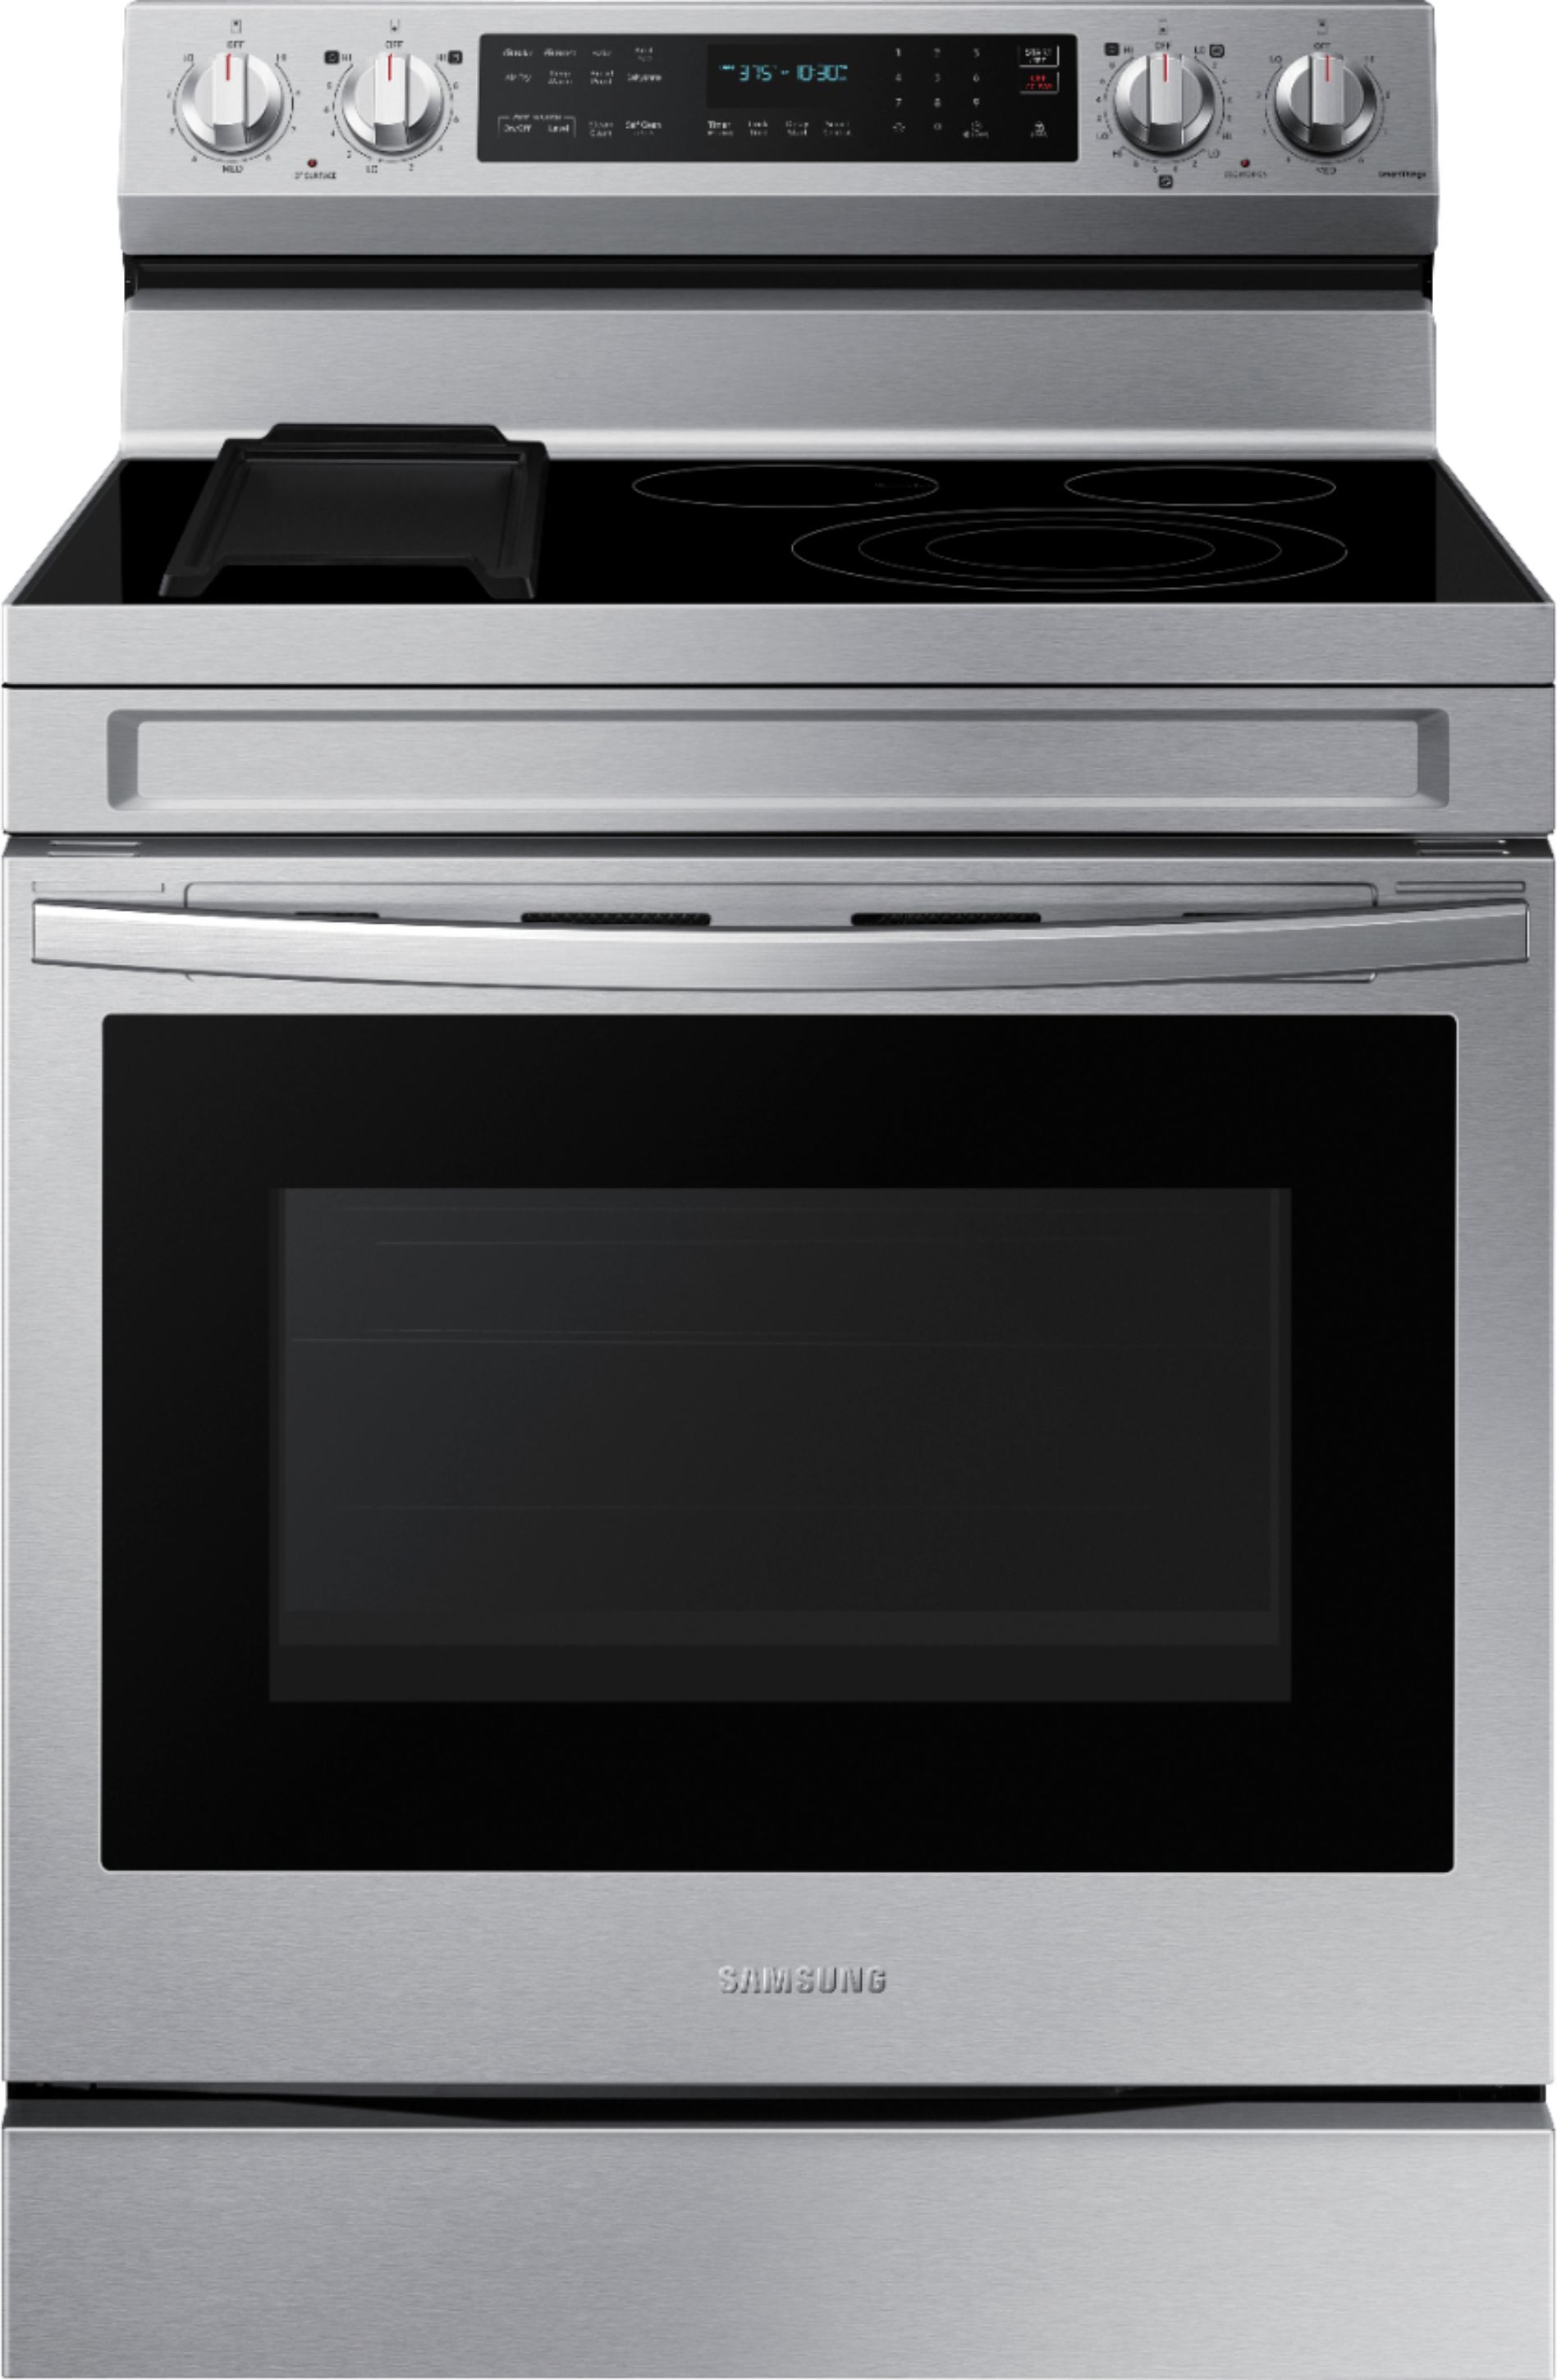 image of Samsung - 6.3 cu. ft. Freestanding Electric Convection+ Range with WiFi, No-Preheat Air Fry and Griddle - Stainless steel with sku:ne63a6711ss-abt